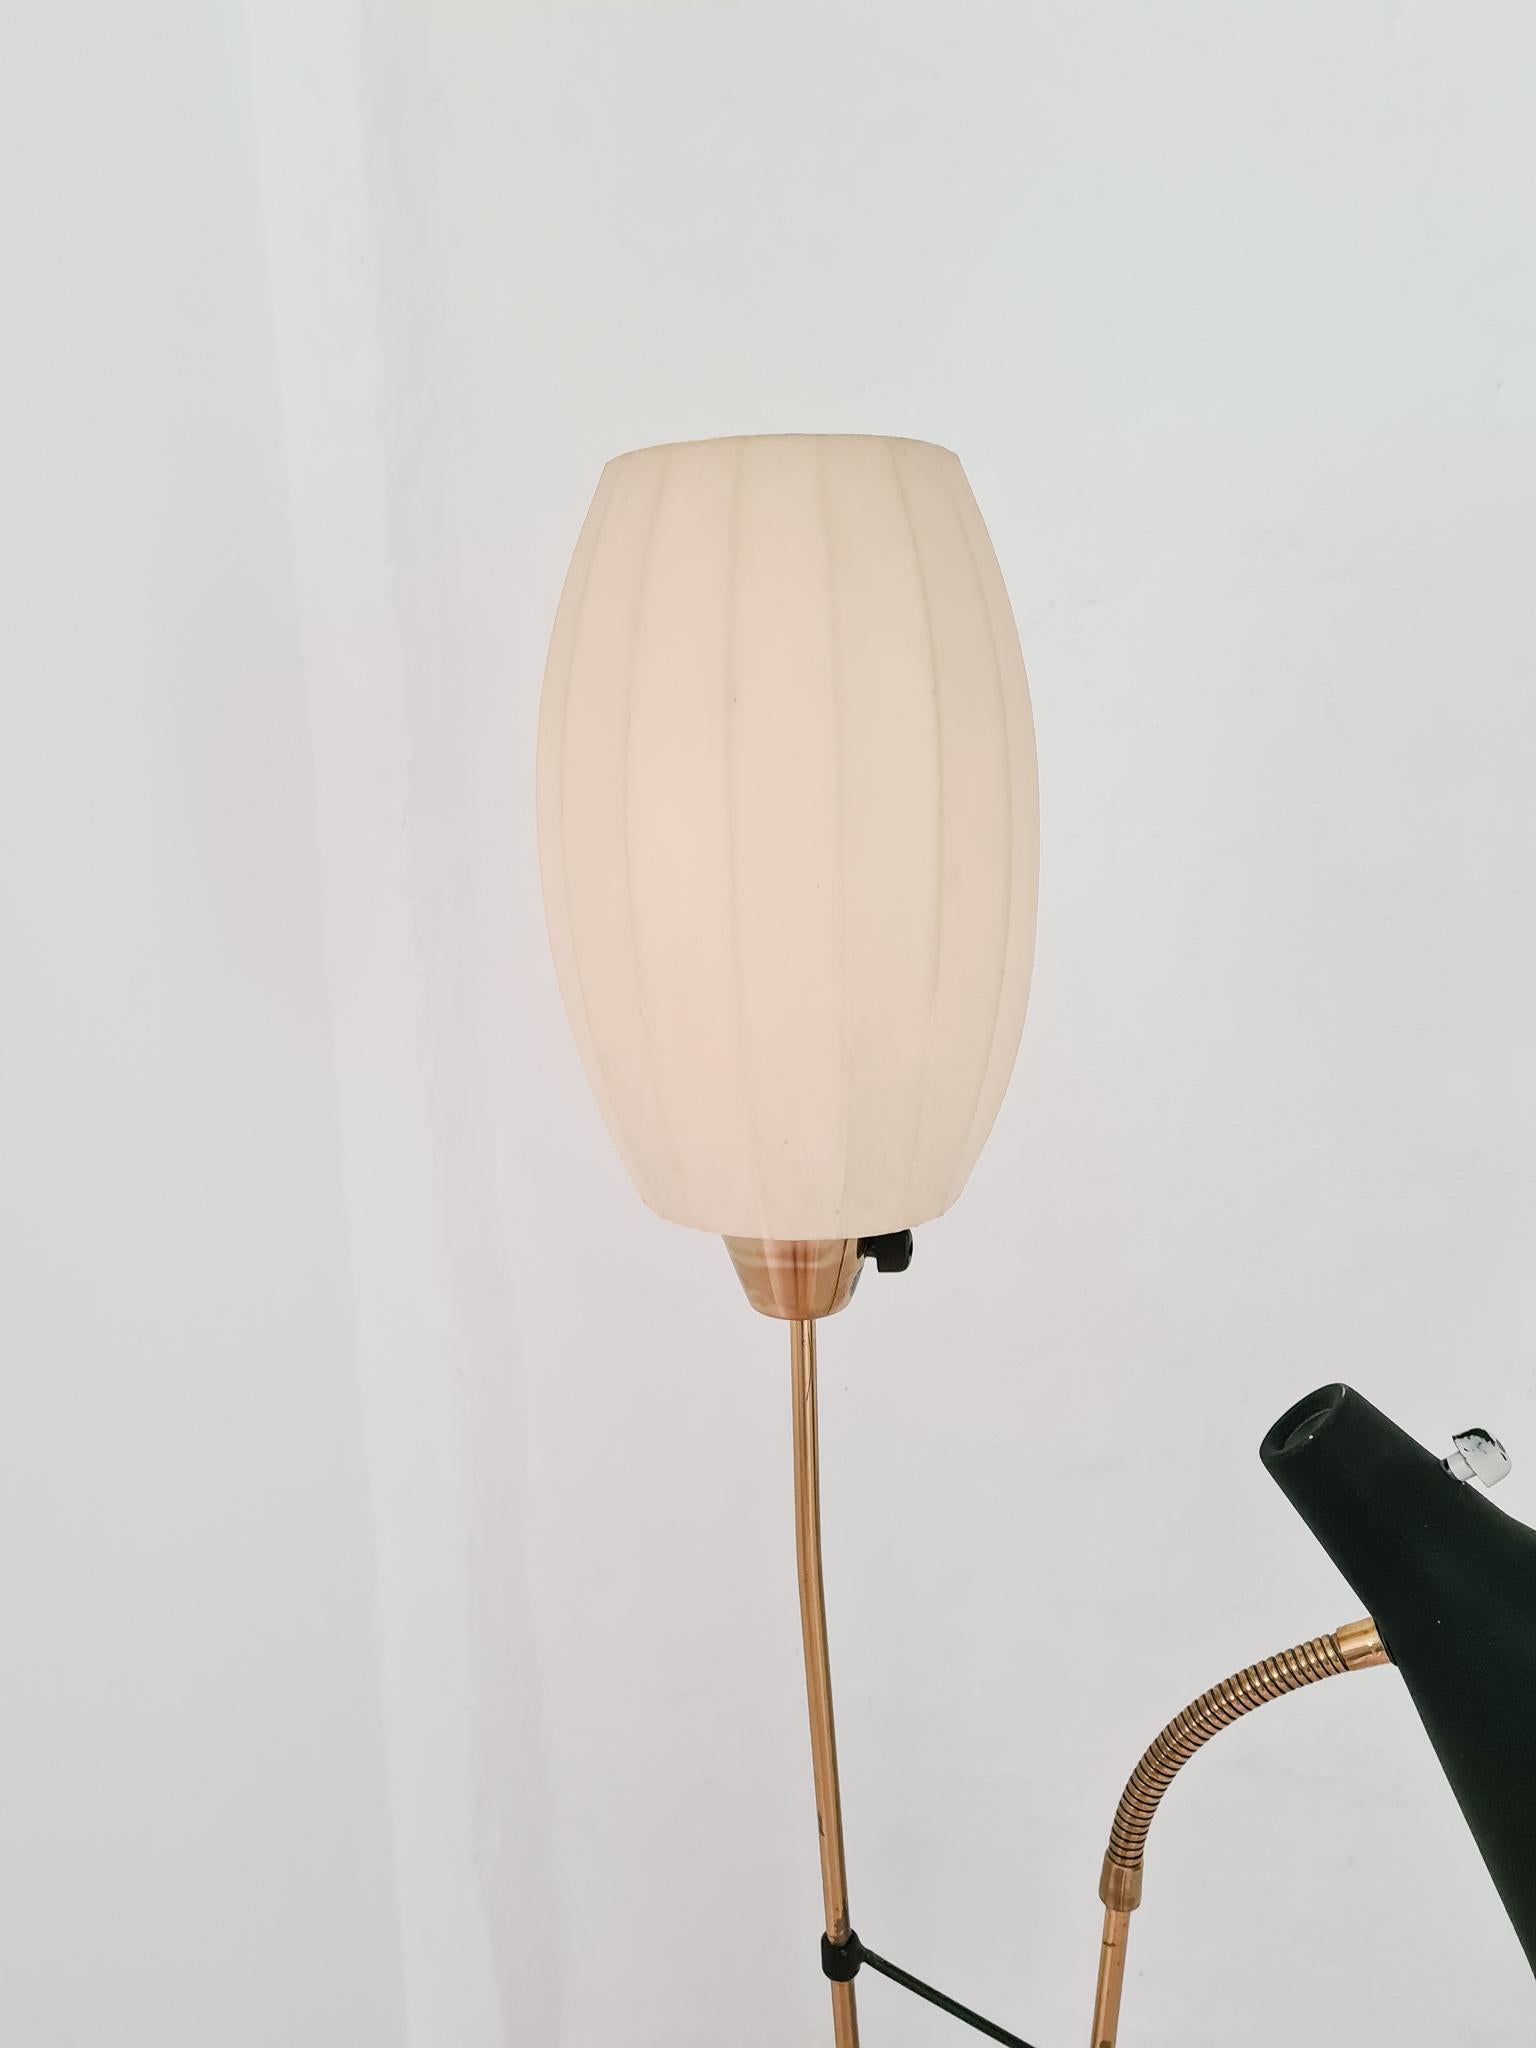 Brass Midcentury Floor Lamp Attributed to Hans Bergström for Ateljé Lyktan For Sale